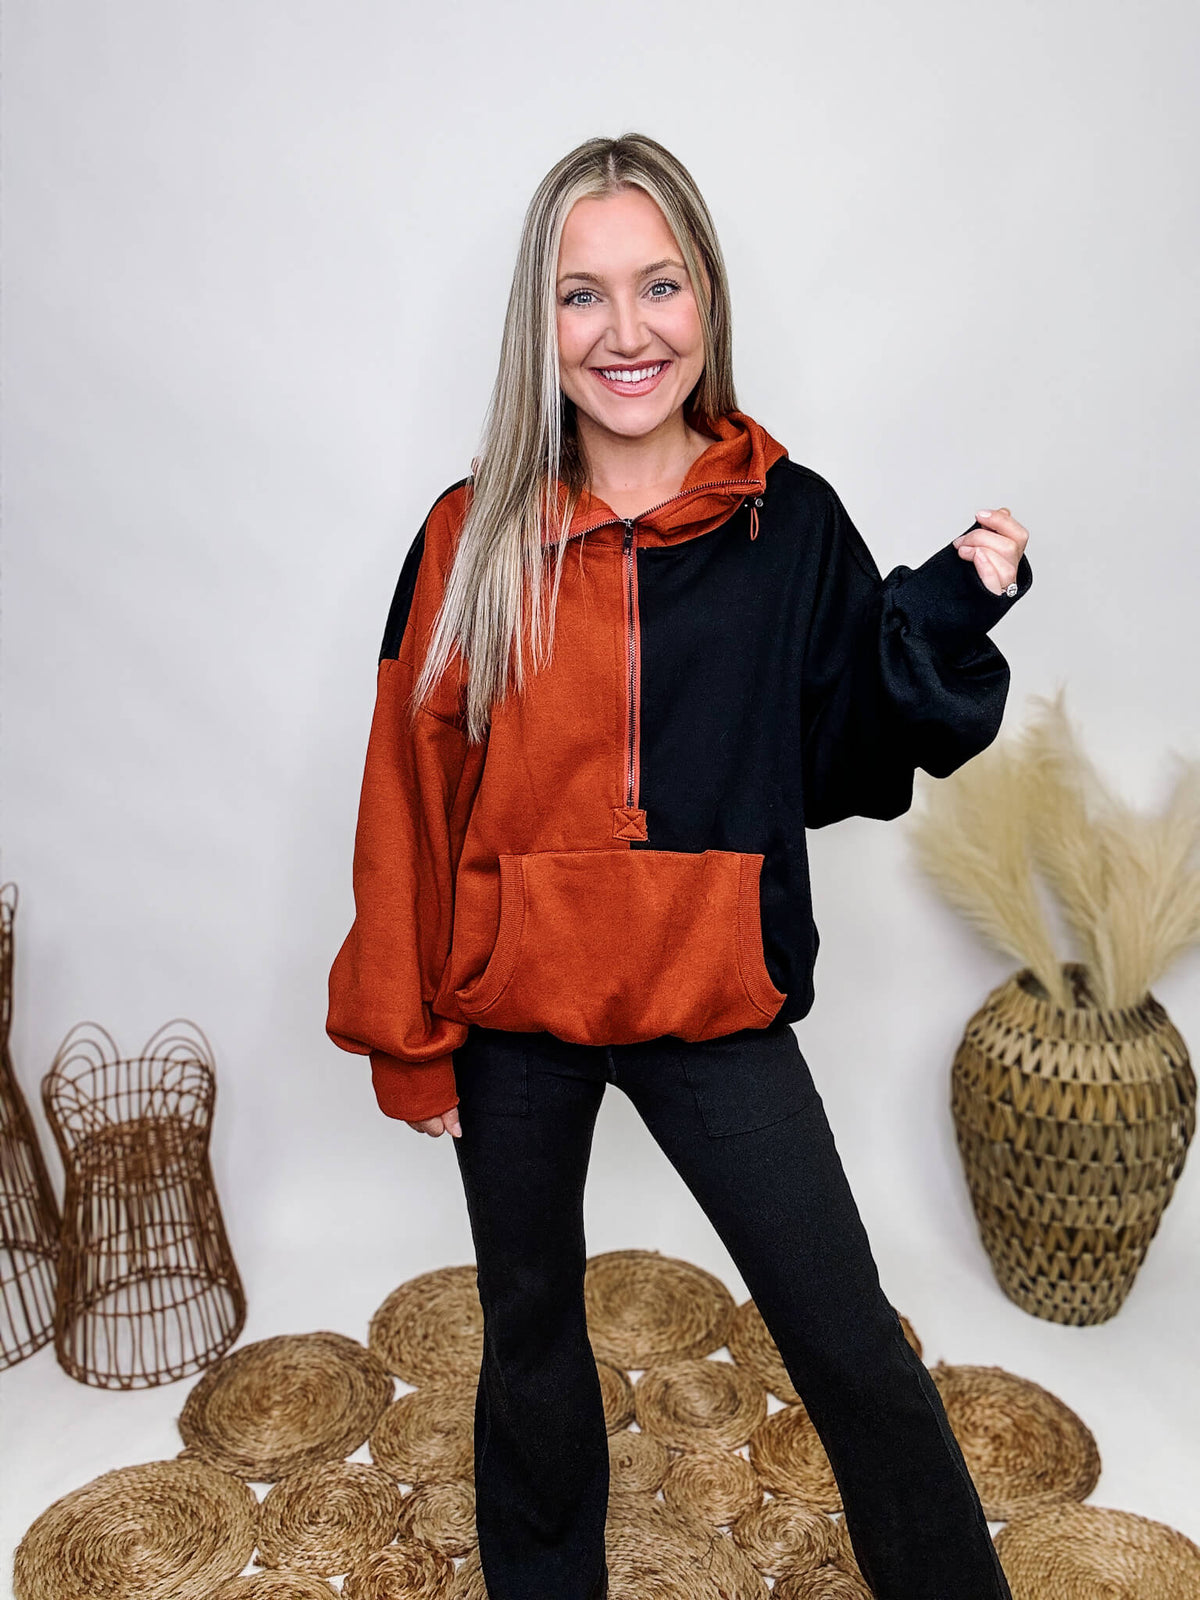 BiBi Rust and Black Colorblock Hoodie Pullover Fleece Lined Toggle Details at Hood Half Zip Elastic Stretchy Hemline Kangaroo Pocket Ribbed Cuff Details Oversized Fit